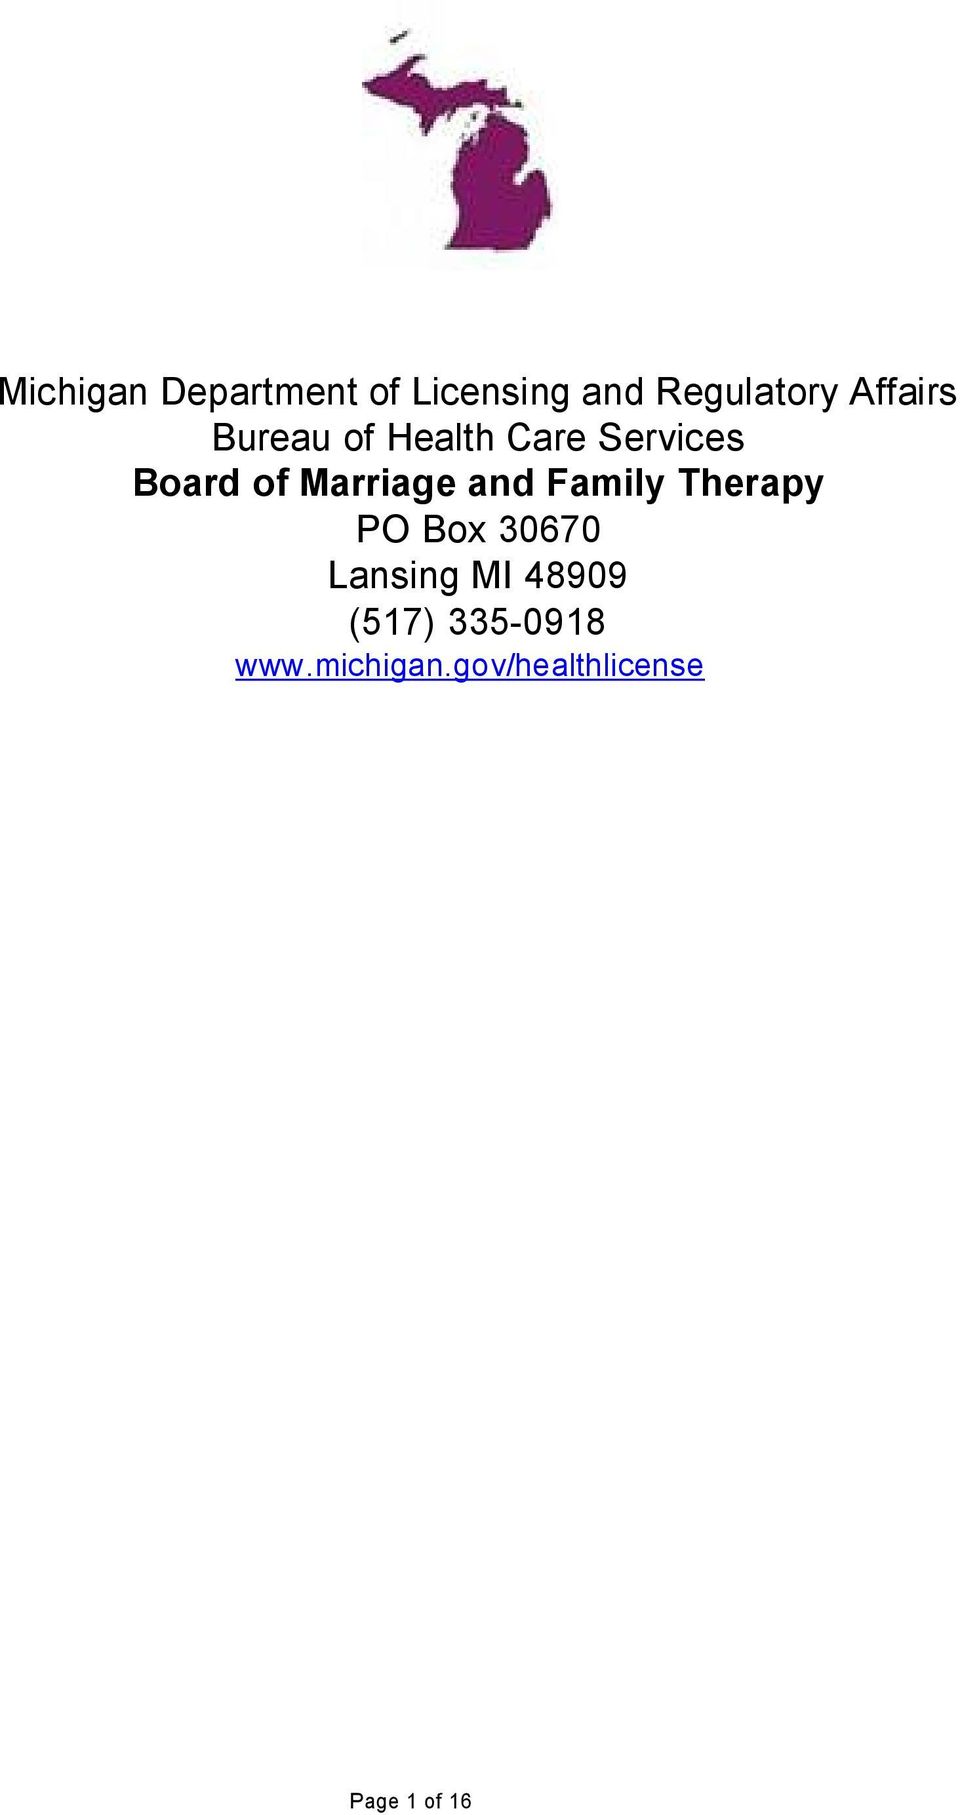 Marriage and Family Therapy PO Box 30670 Lansing MI